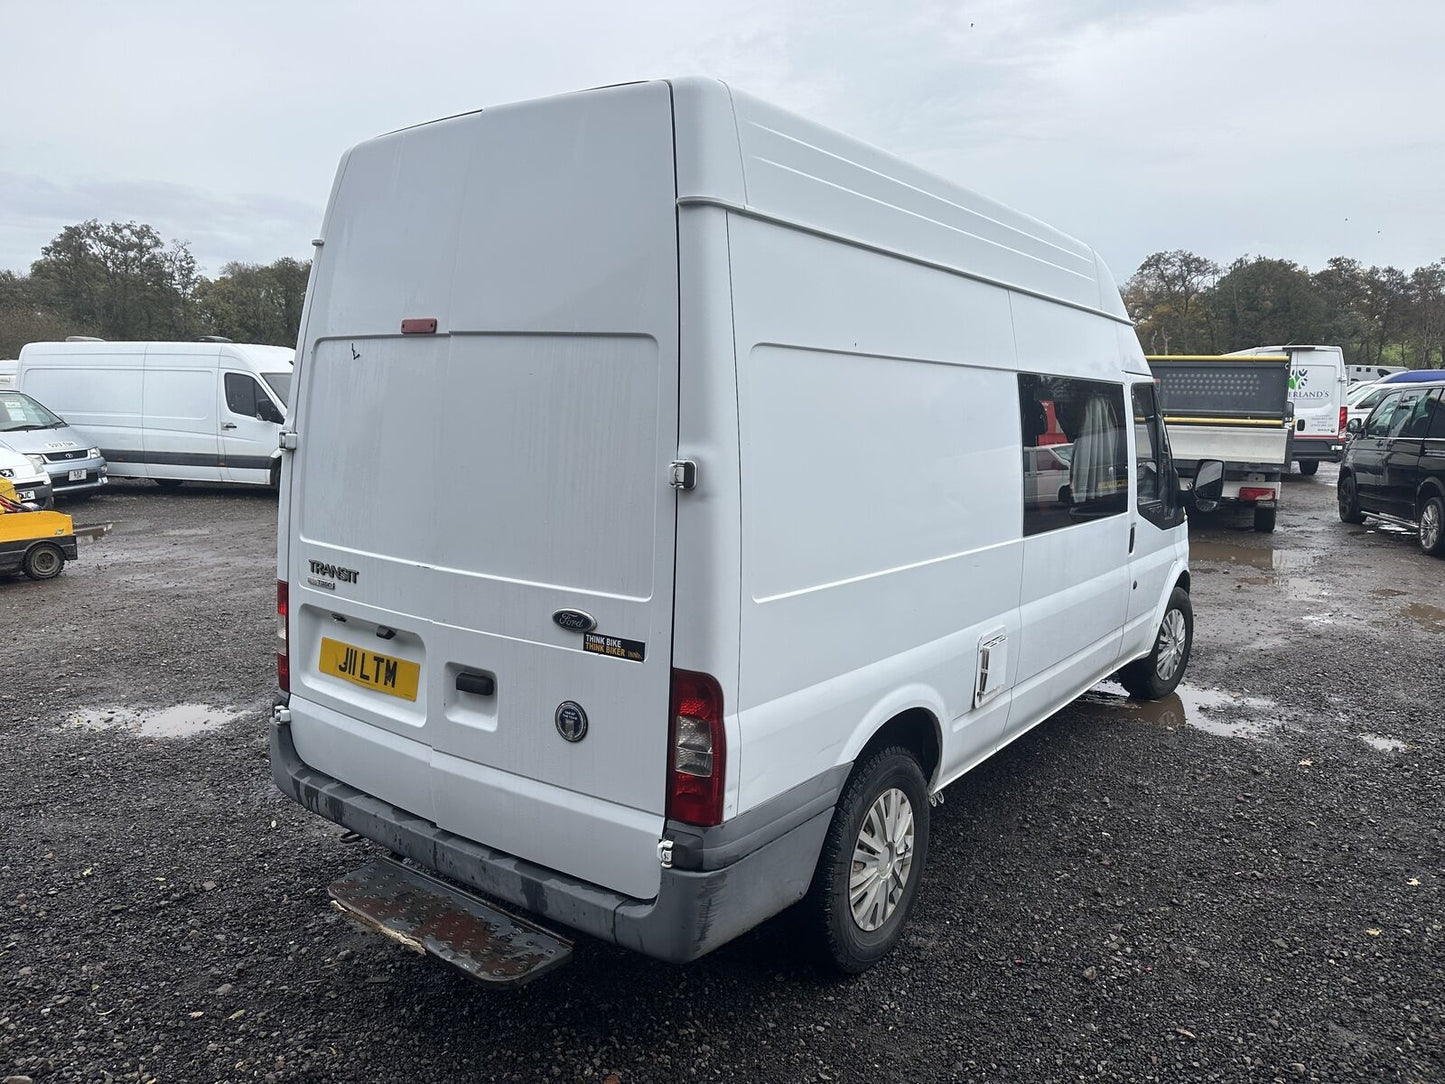 Bid on EXPLORE FREELY: 2007 FORD TRANSIT 115 CAMPER - YOUR ROAD-READY ESCAPE - NO VAT ON HAMMER- Buy &amp; Sell on Auction with EAMA Group